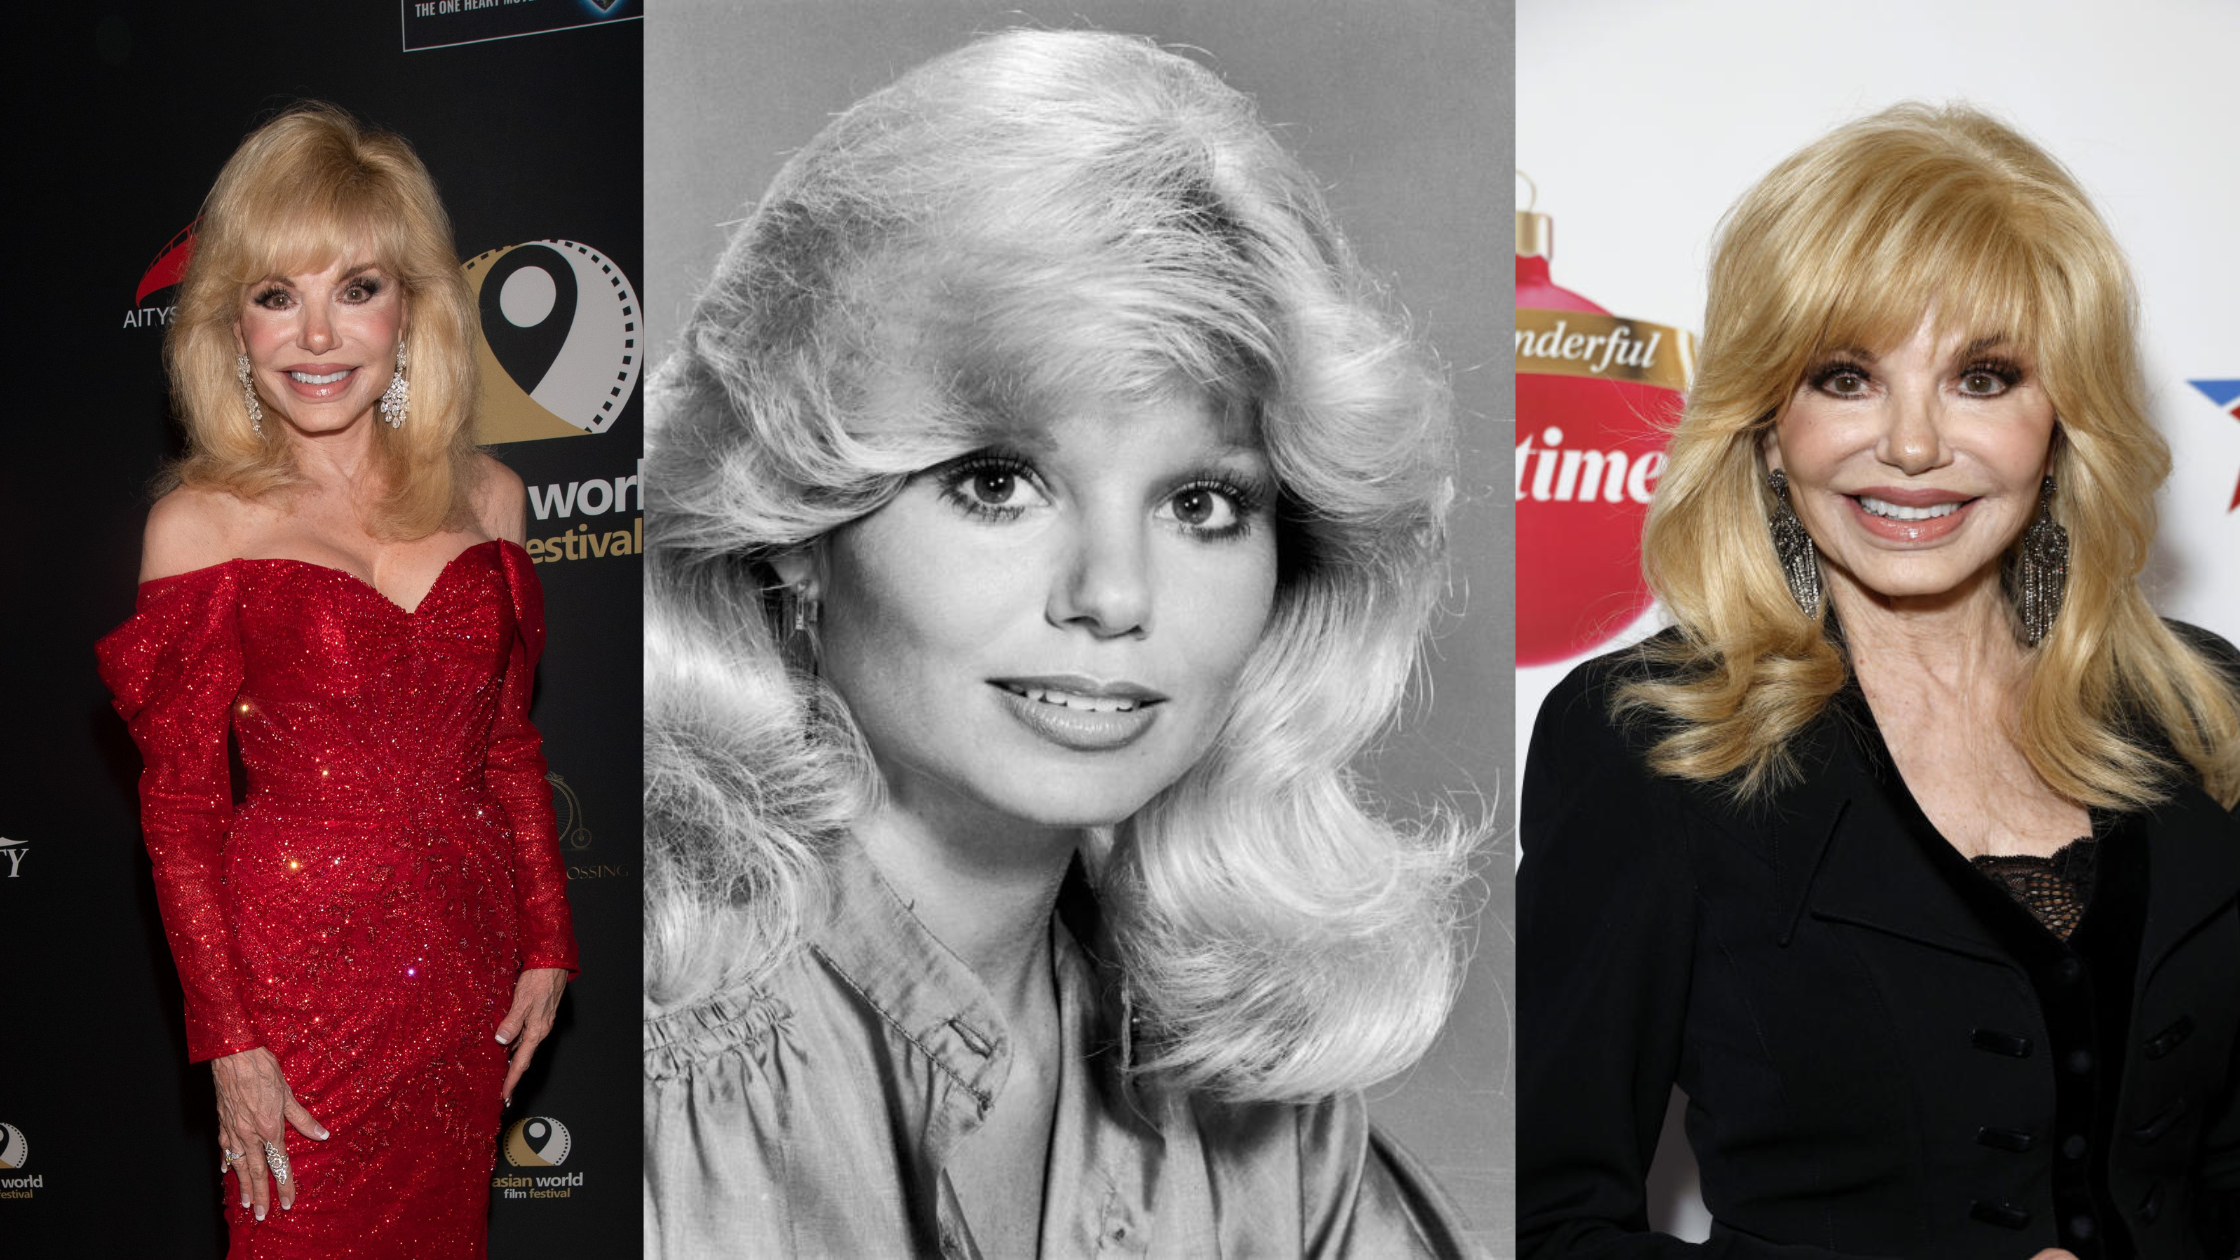 Loni Anderson: What Happened To Her and What Is She Upto?